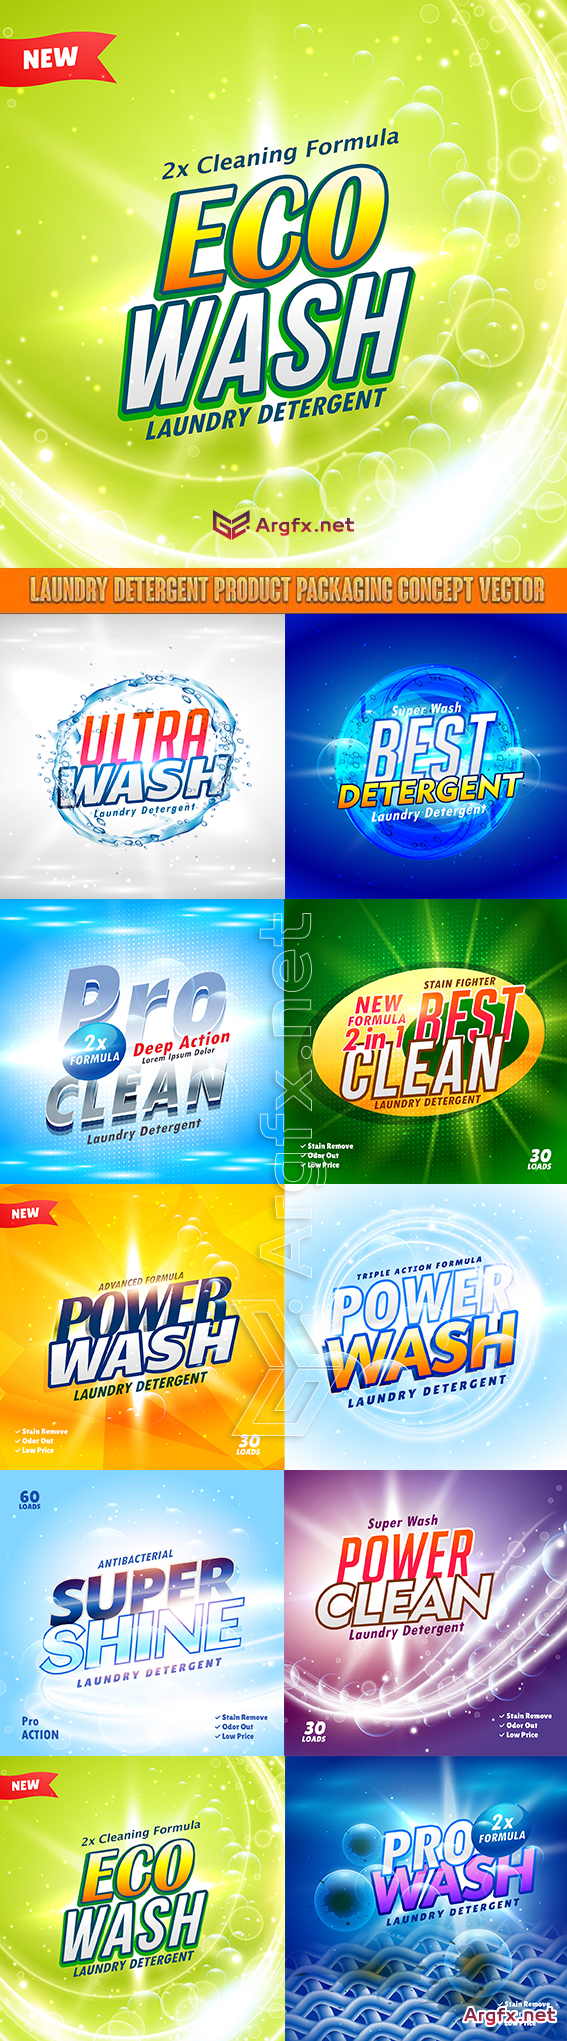 Laundry detergent product packaging concept vector